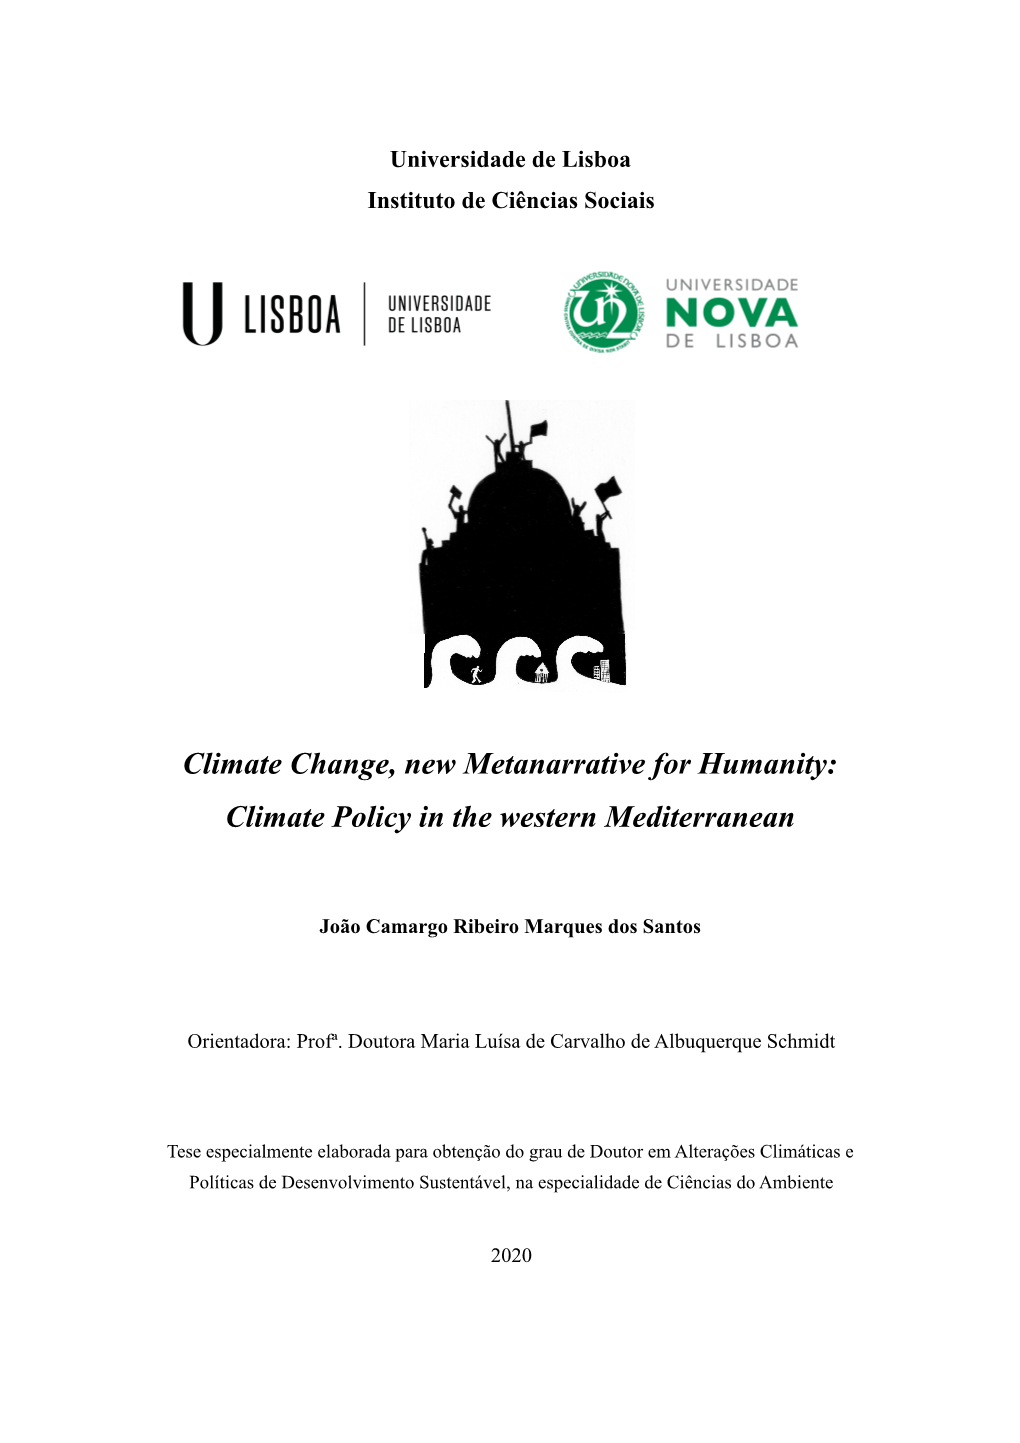 Climate Change, New Metanarrative for Humanity: Climate Policy in the Western Mediterranean